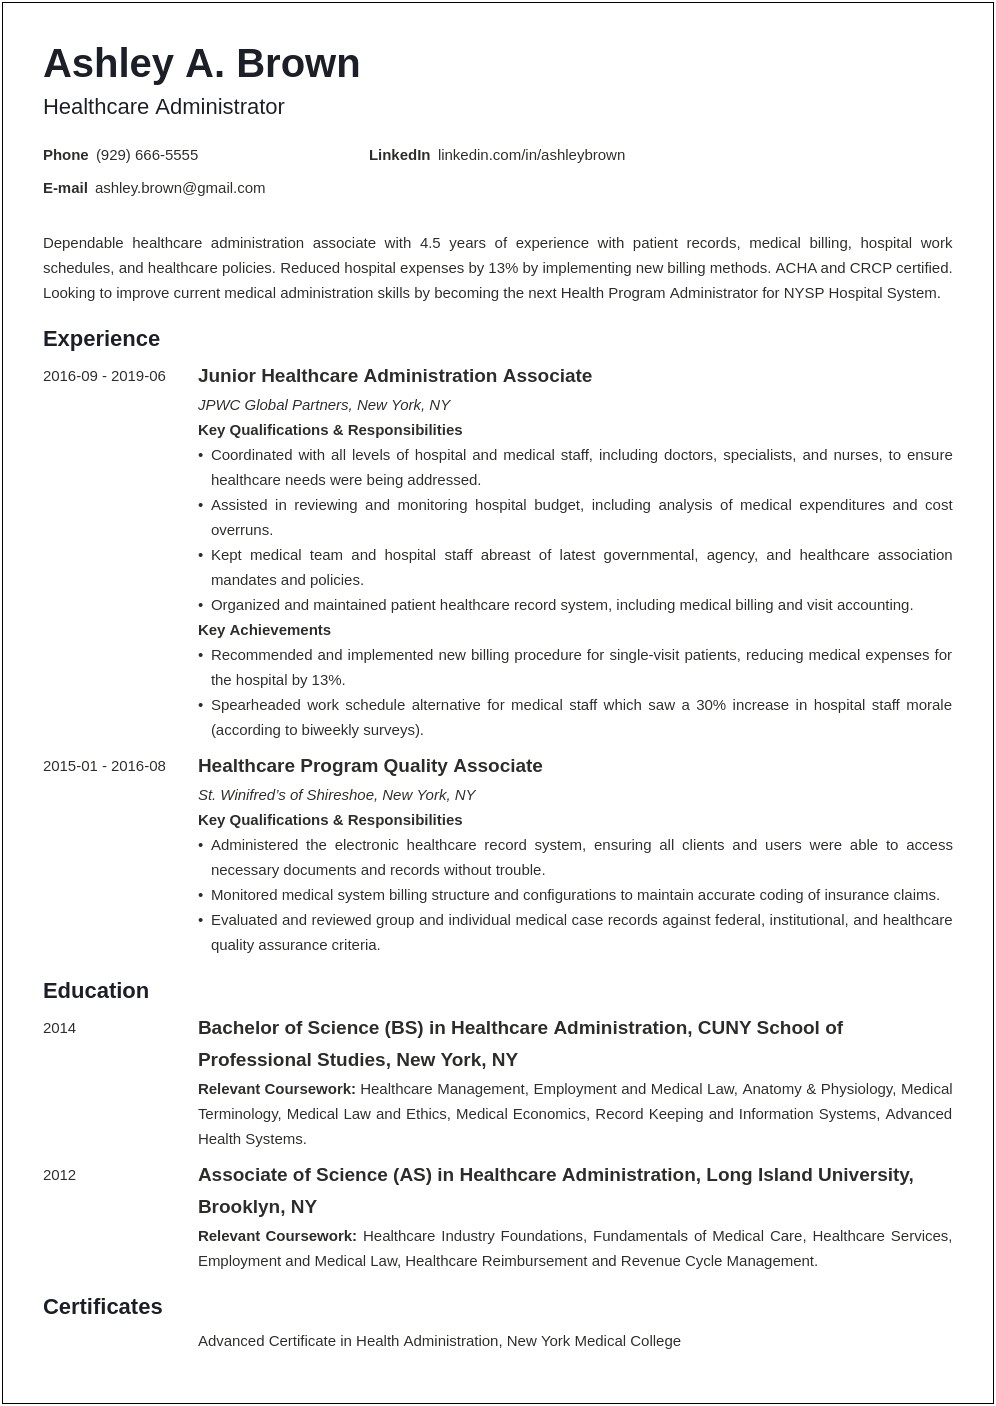 Relevant Coursework On Resume Sample